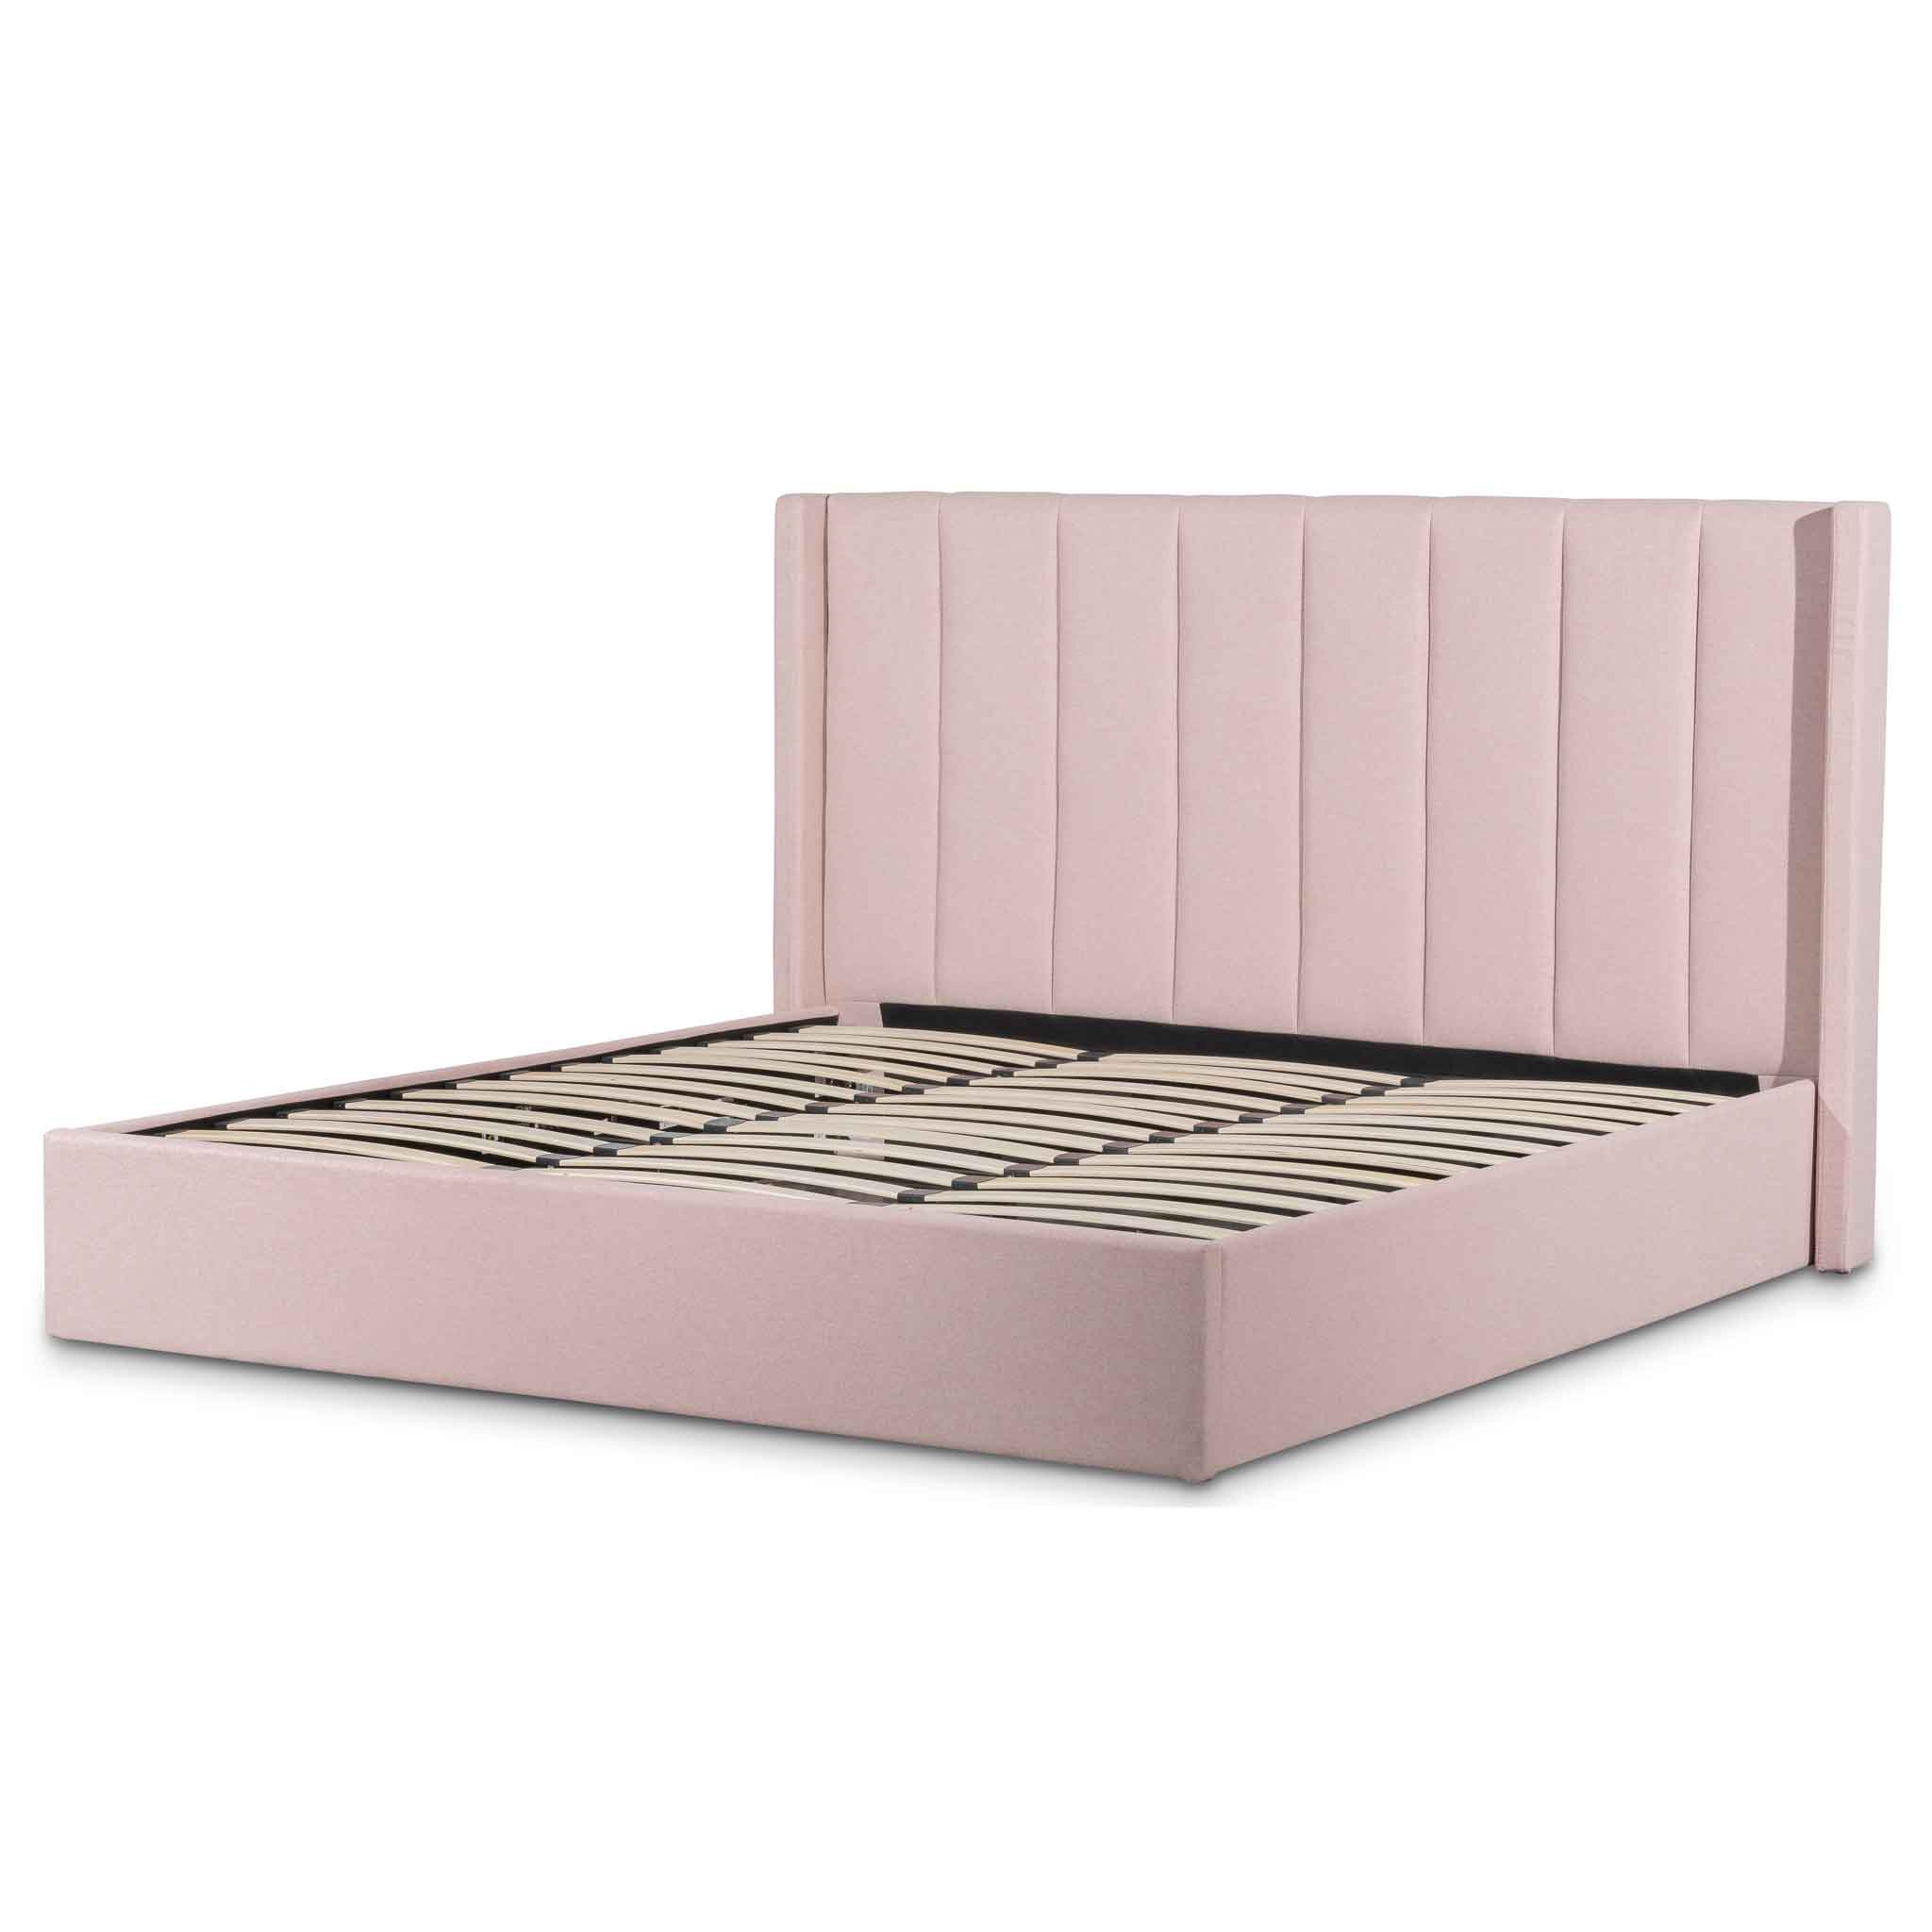 Vivienne Fabric King Bed Frame - Blush Pink with Storage - Beds